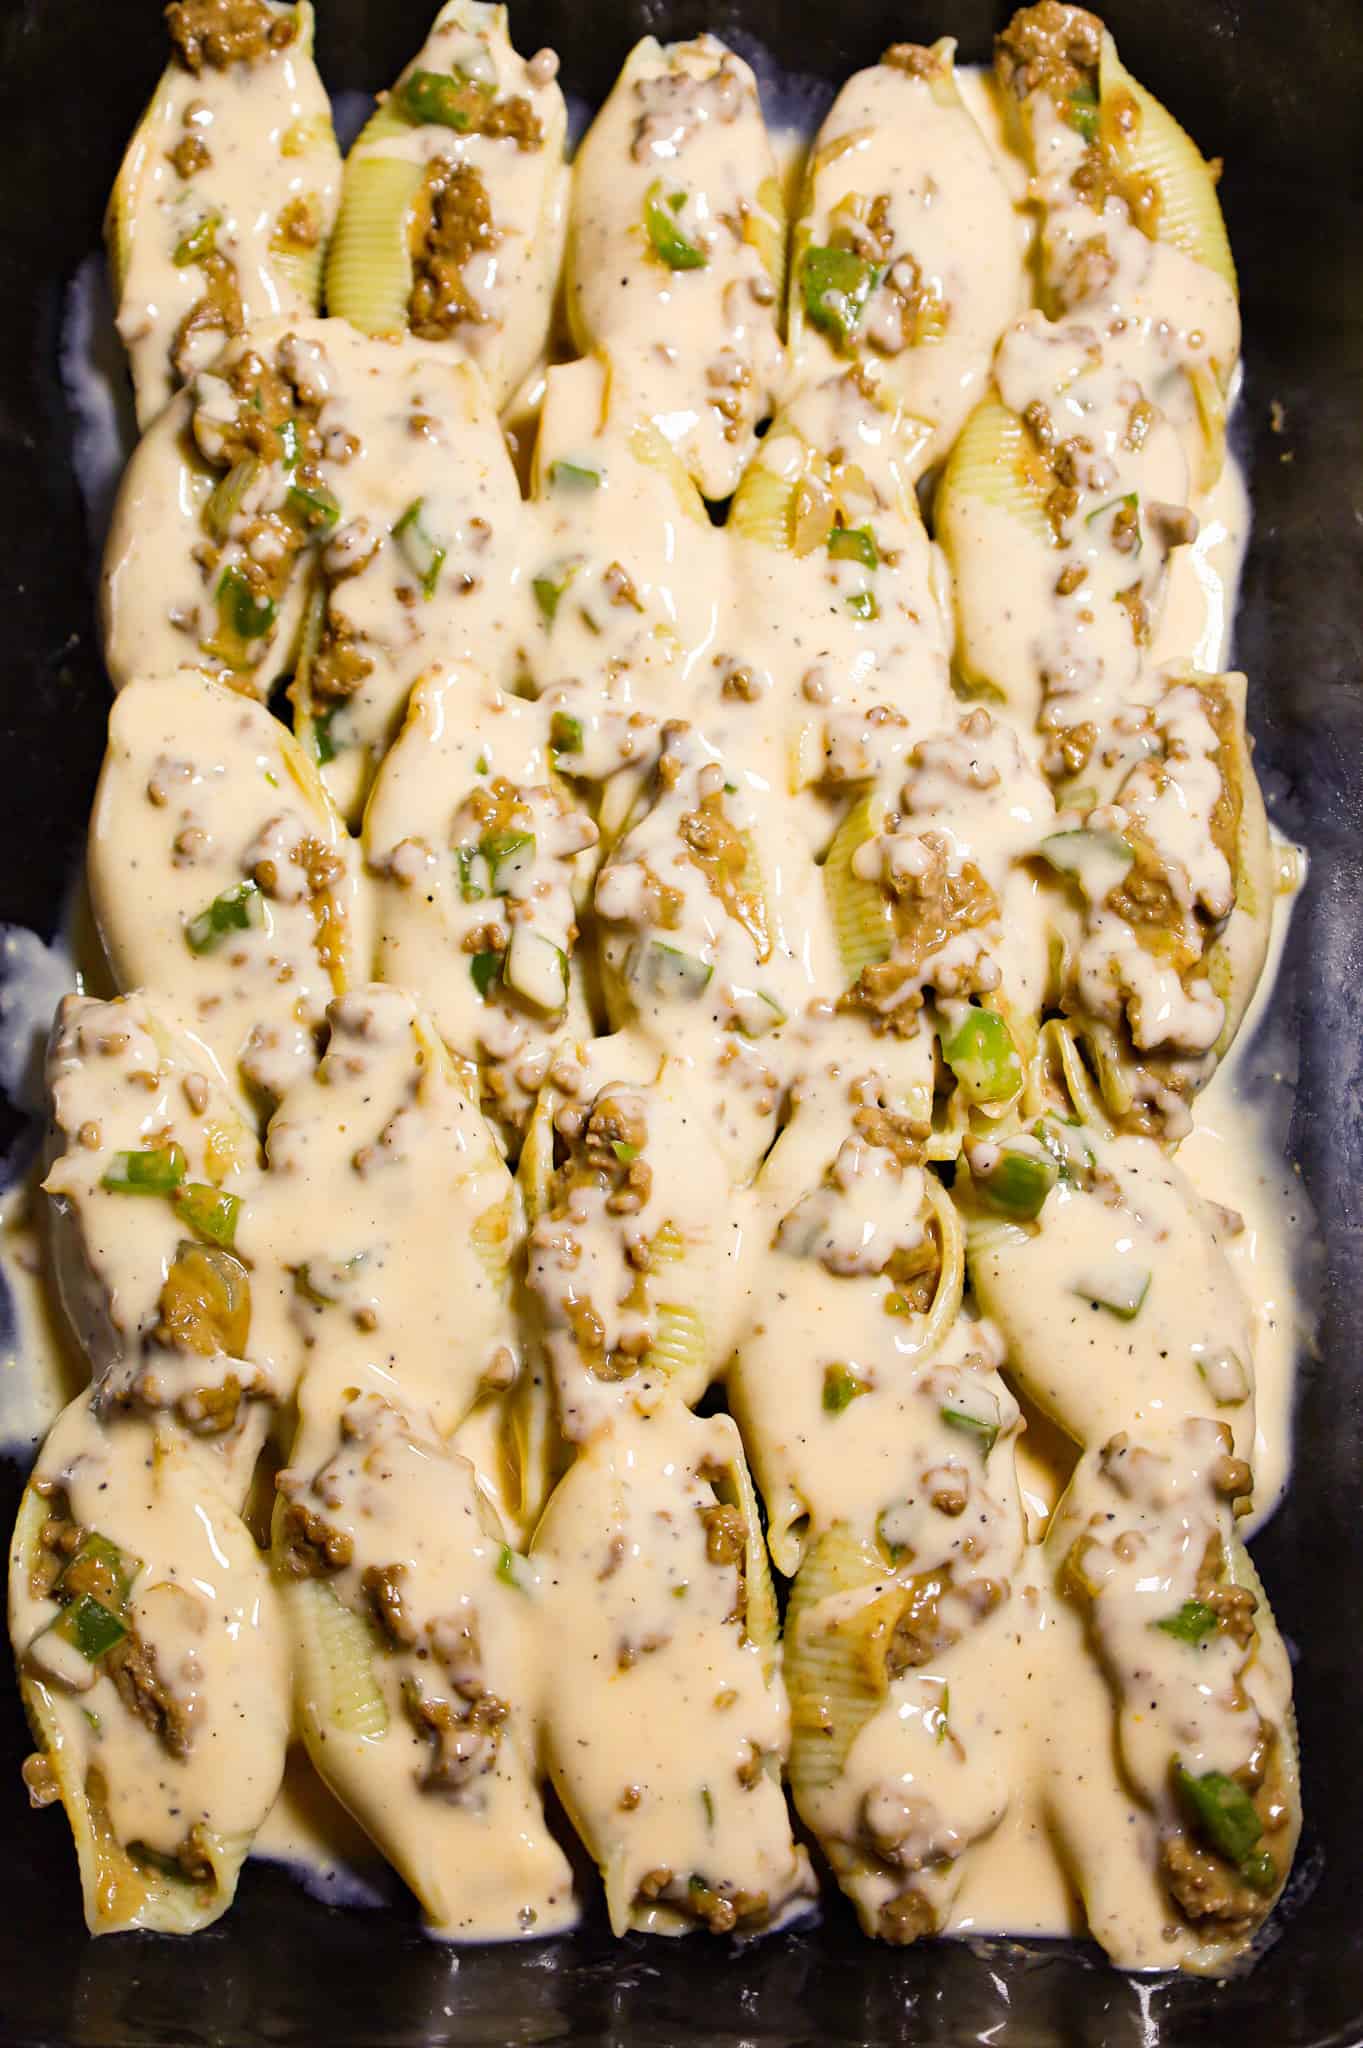 cheddar sauce poured over stuffed shells in a baking dish